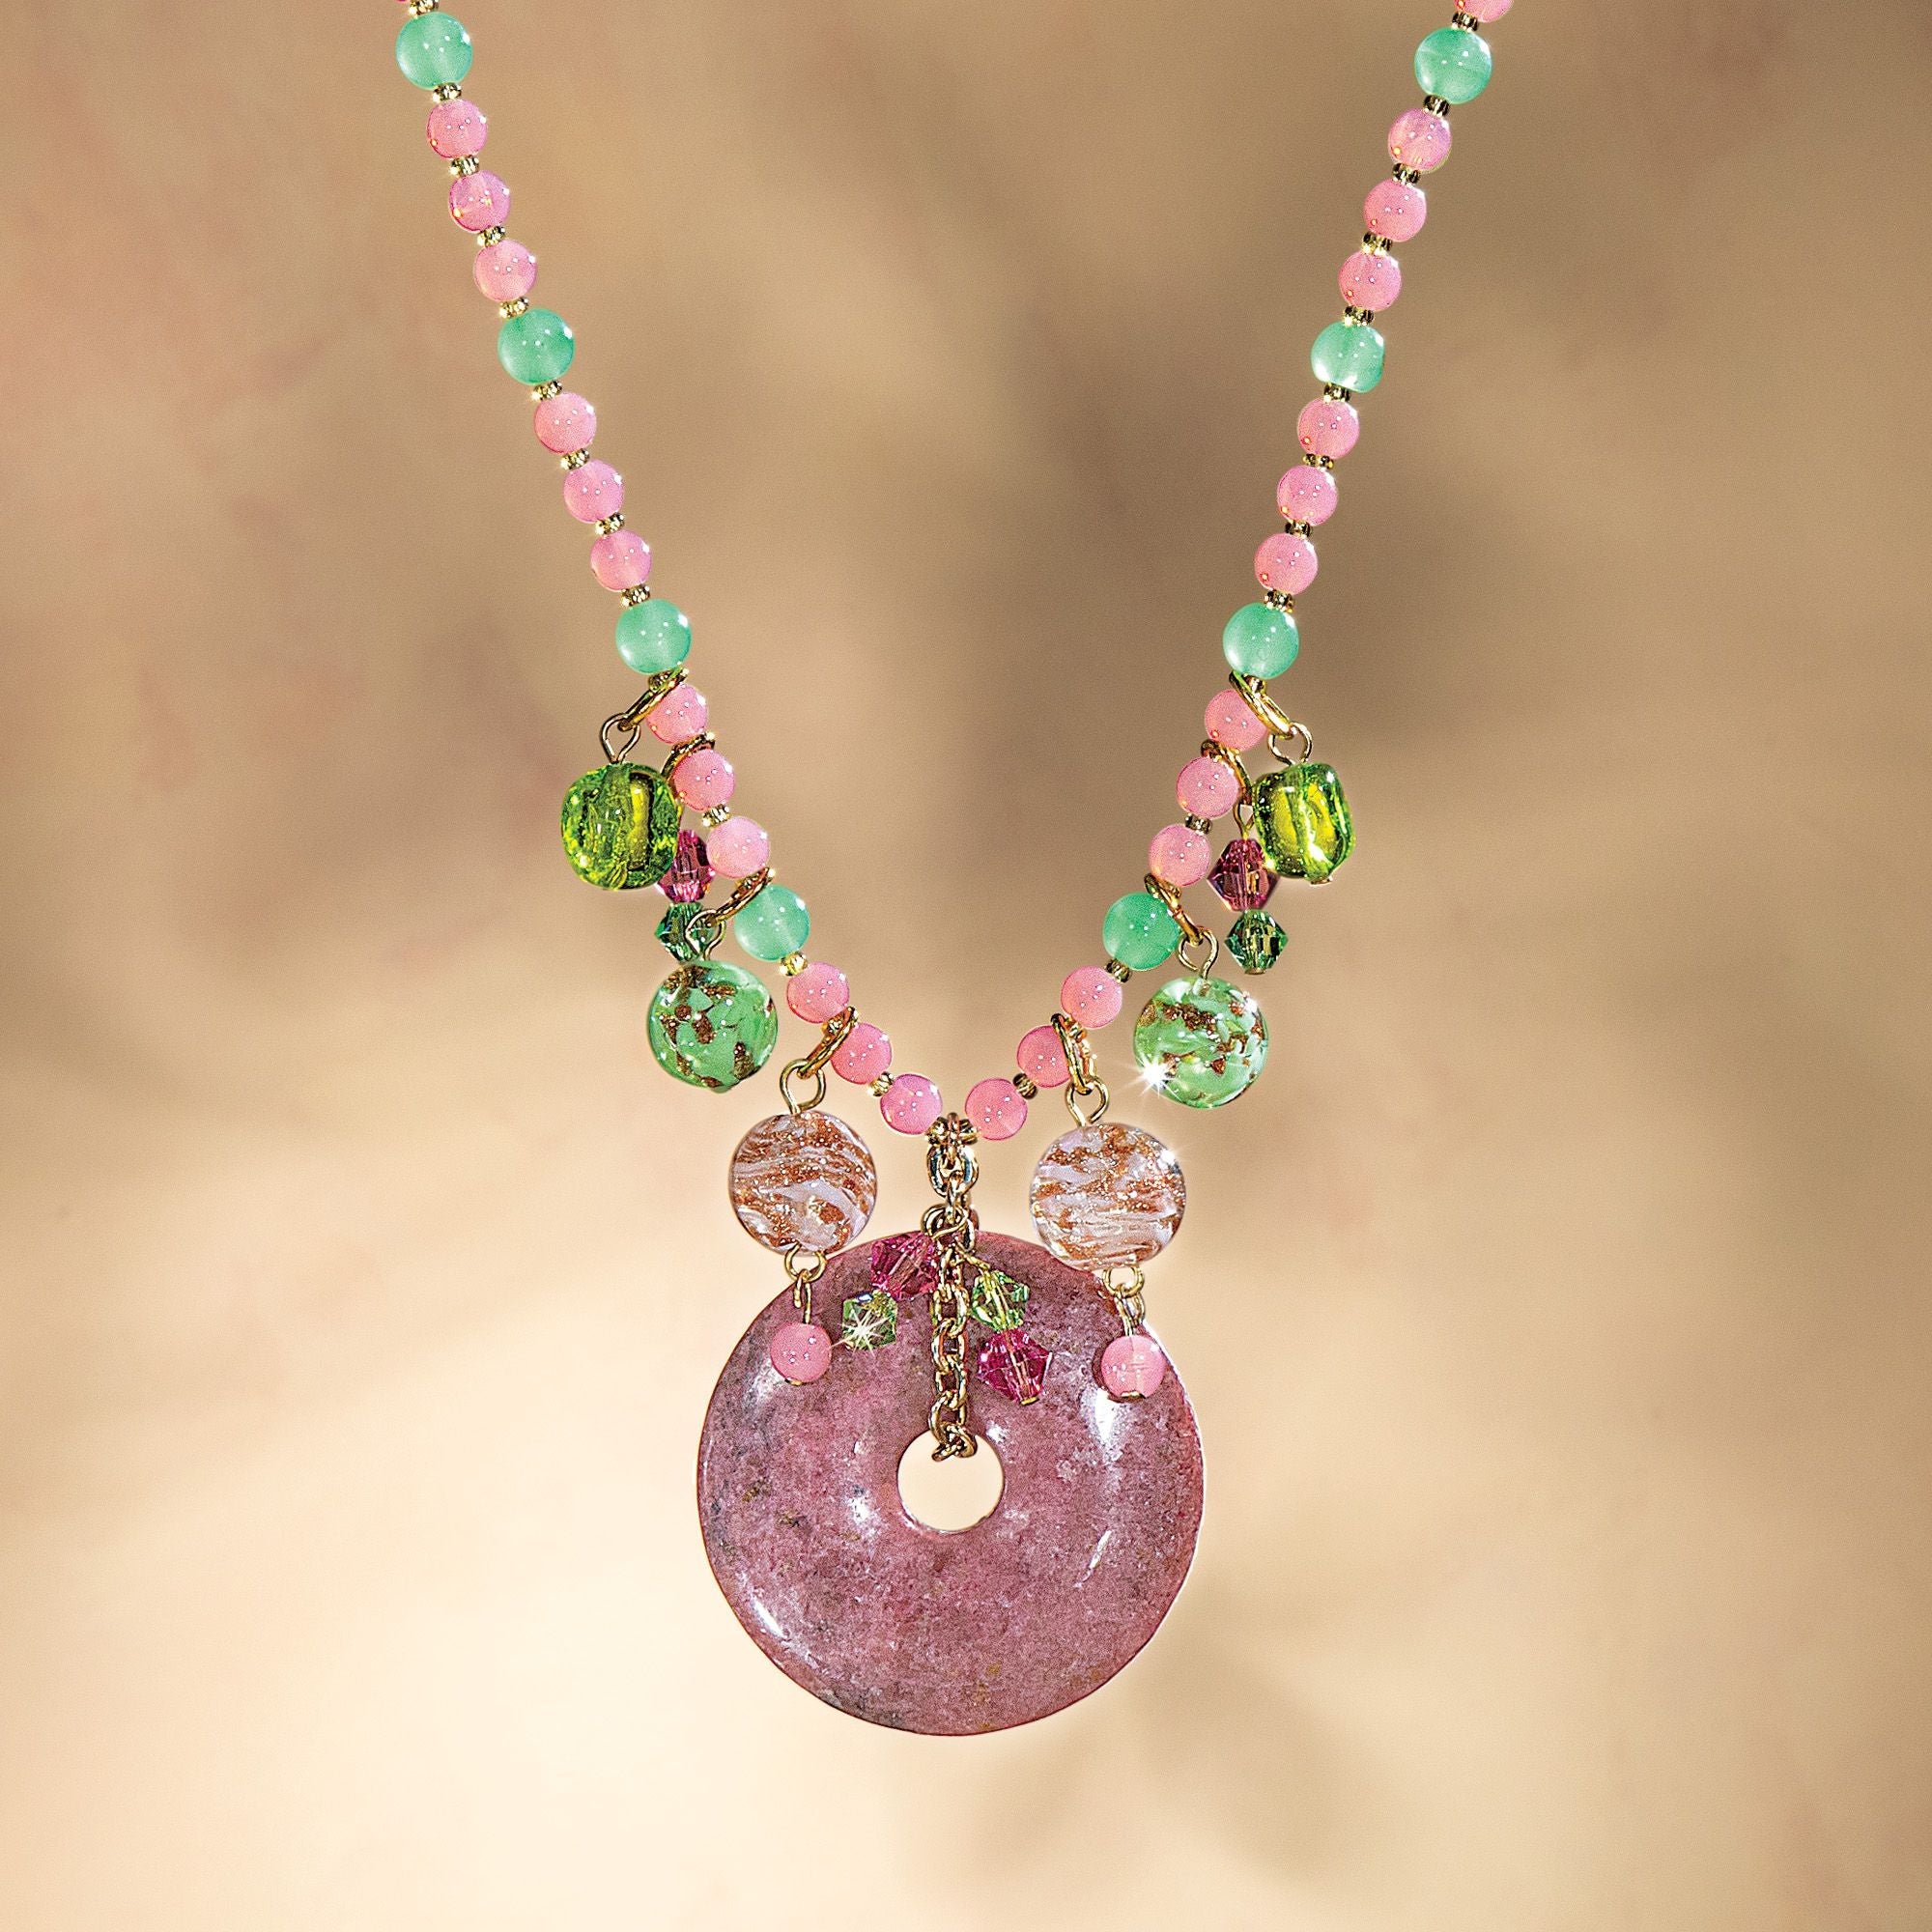 Blooming Vibrance Murano Glass Pendant Necklace